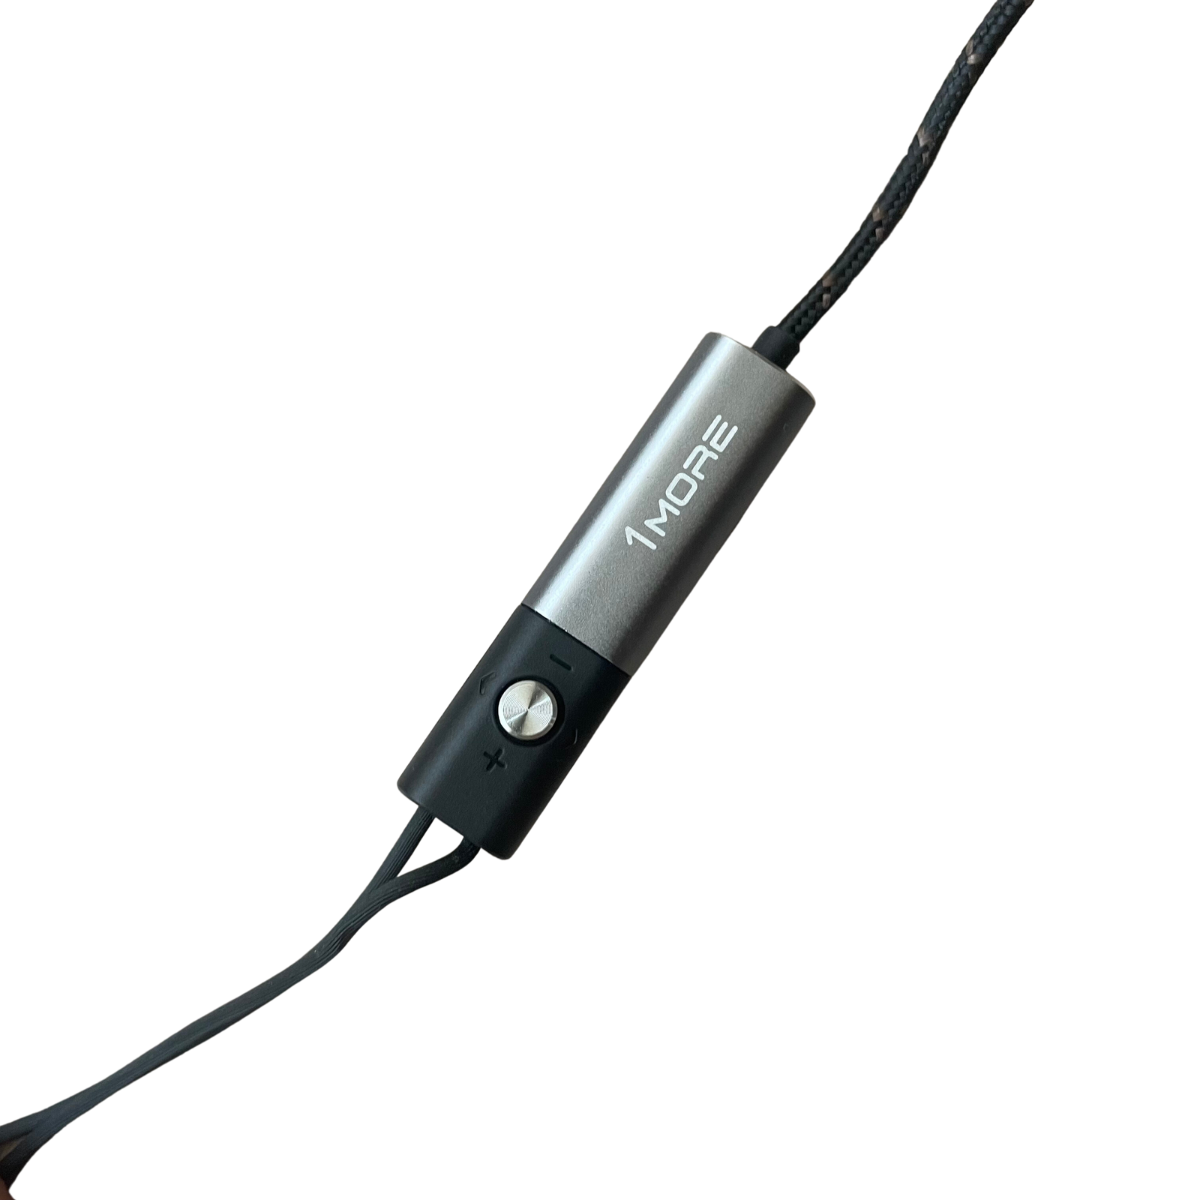 1MORE Triple Driver Lightning Earphones With In-built DAC, MIC & Volume Rockers - Silver (DEMO Unit)